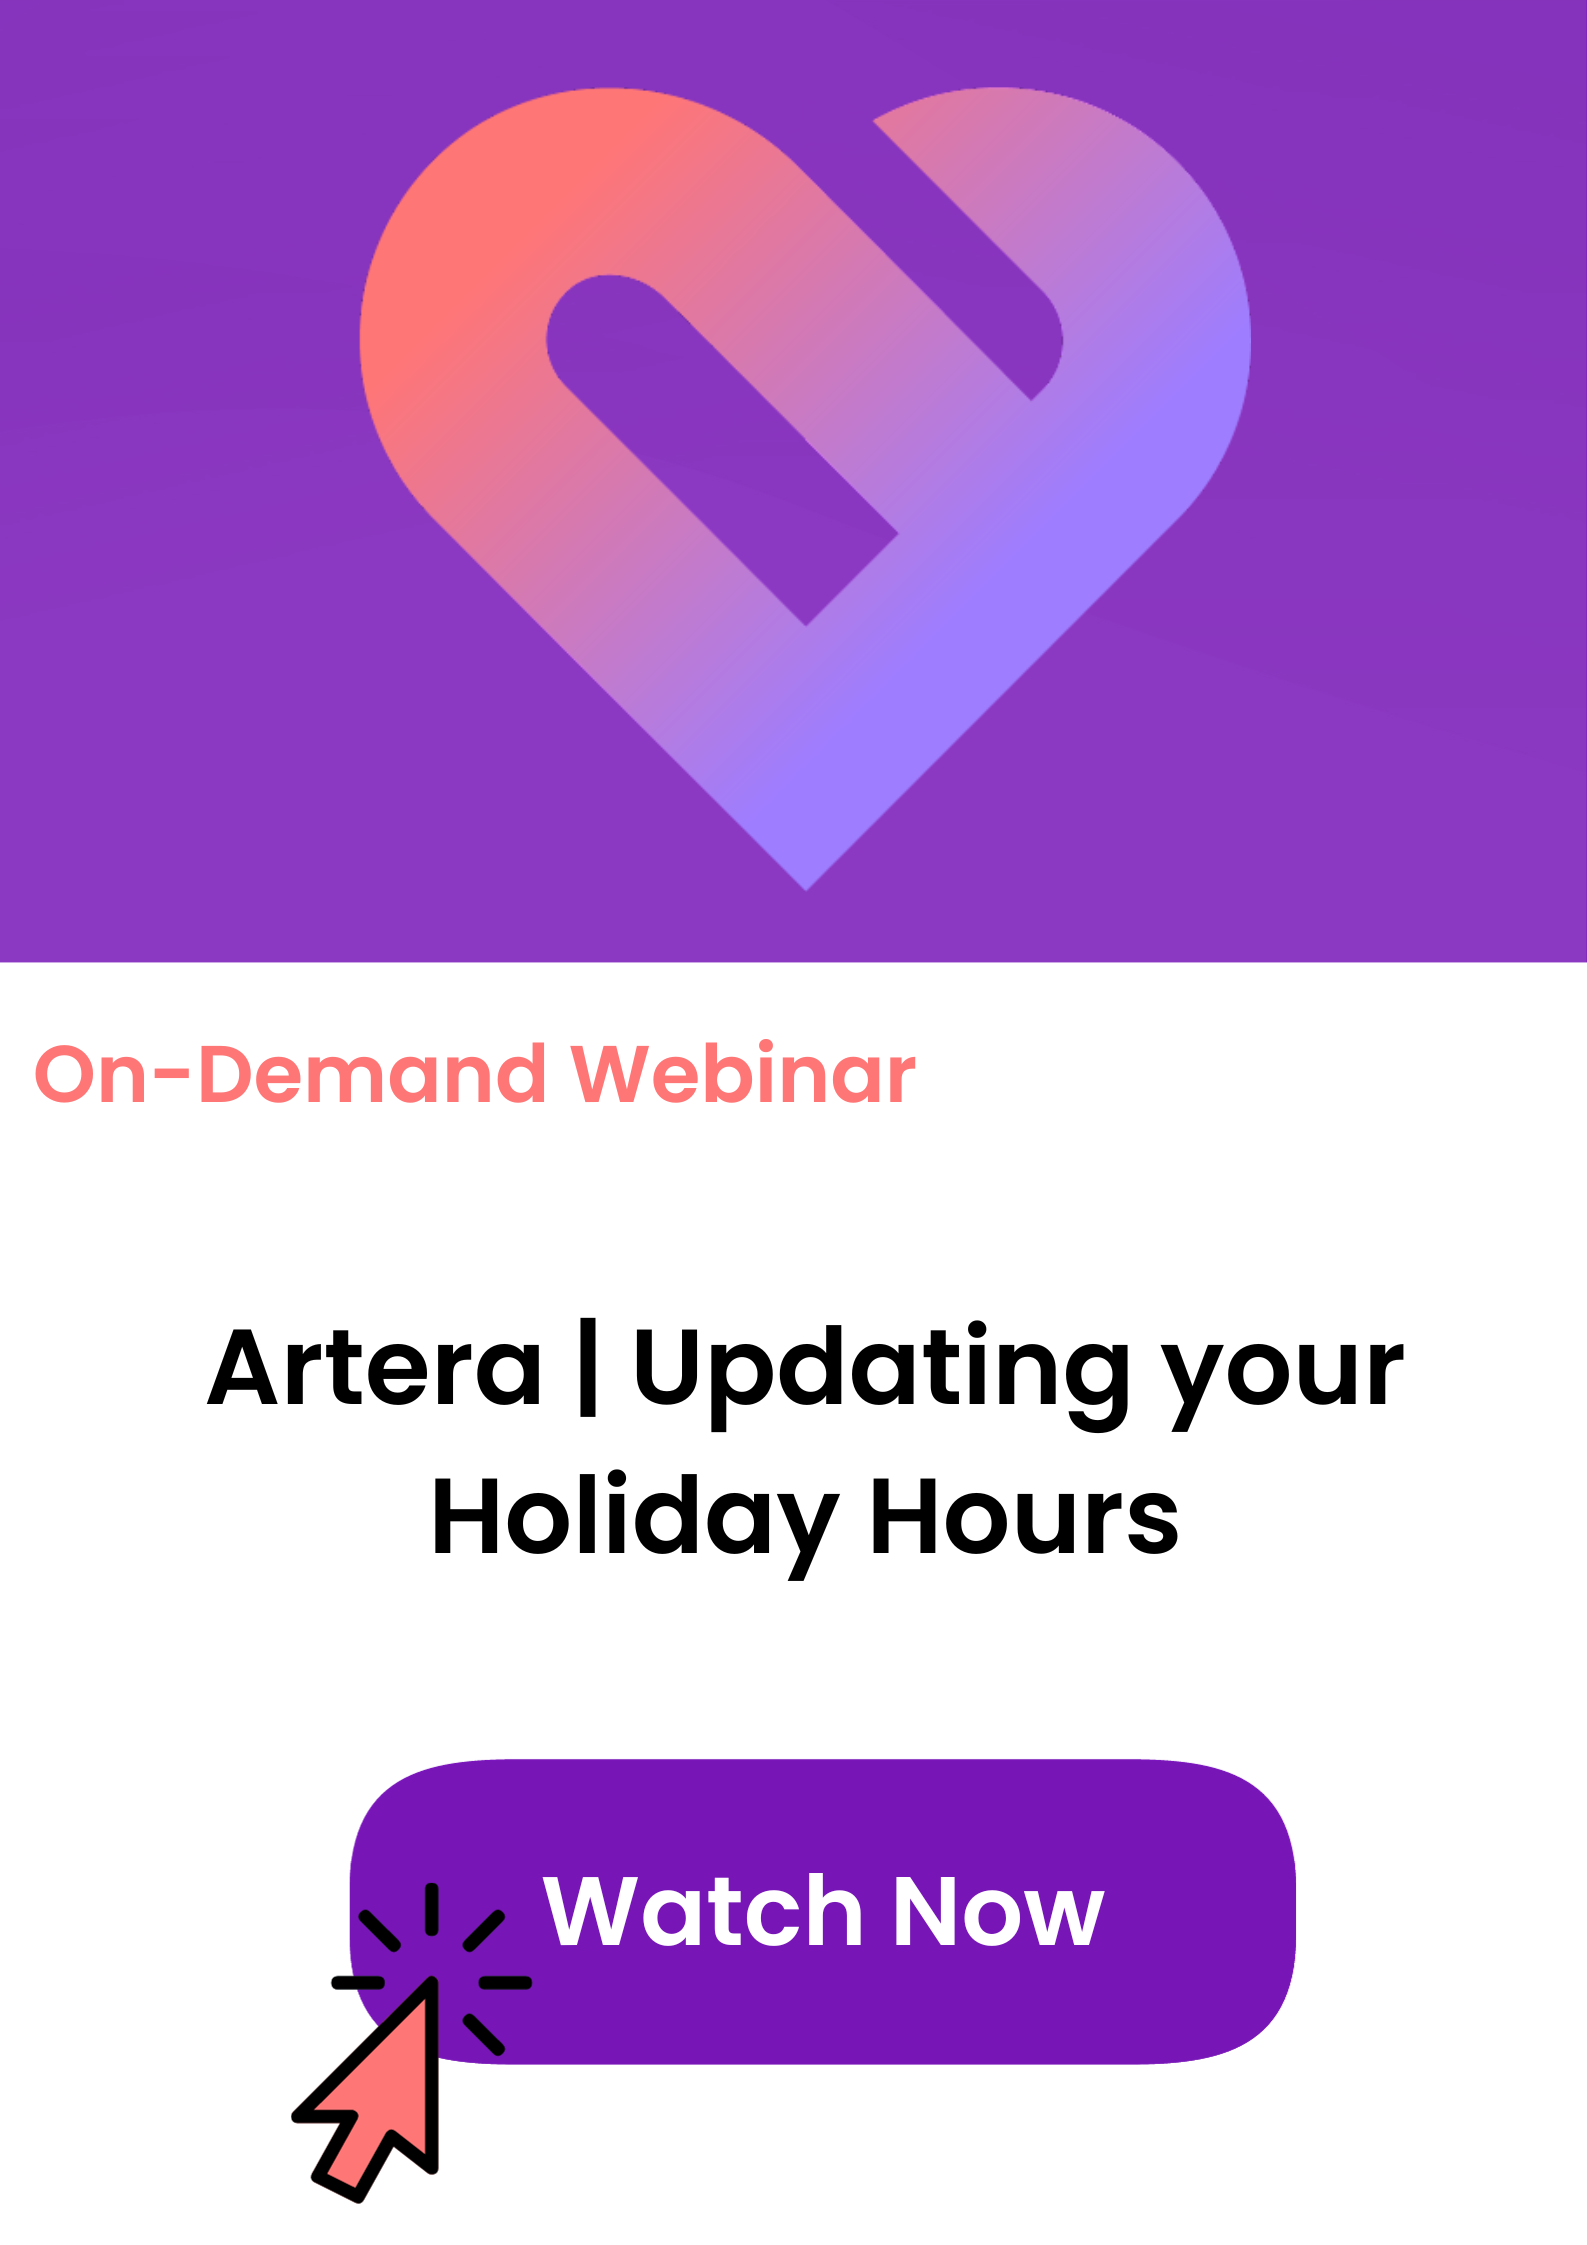 On-demand webinar tile for Updating Holiday Hours, click to watch now